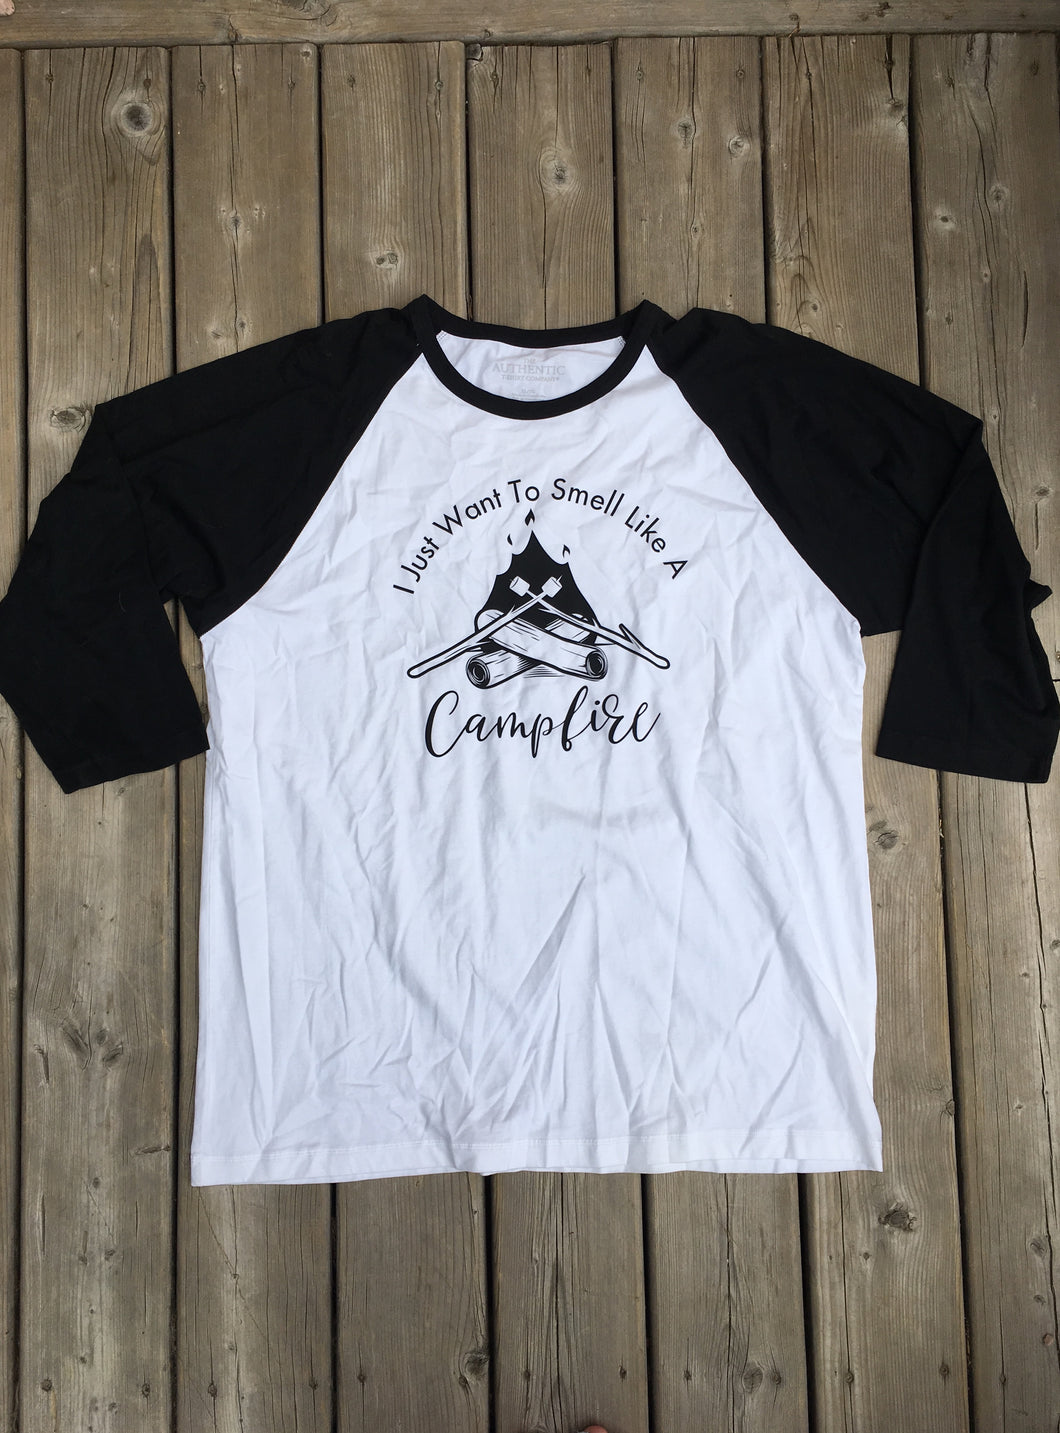 I Just Want to Smell like a Campfire Tee